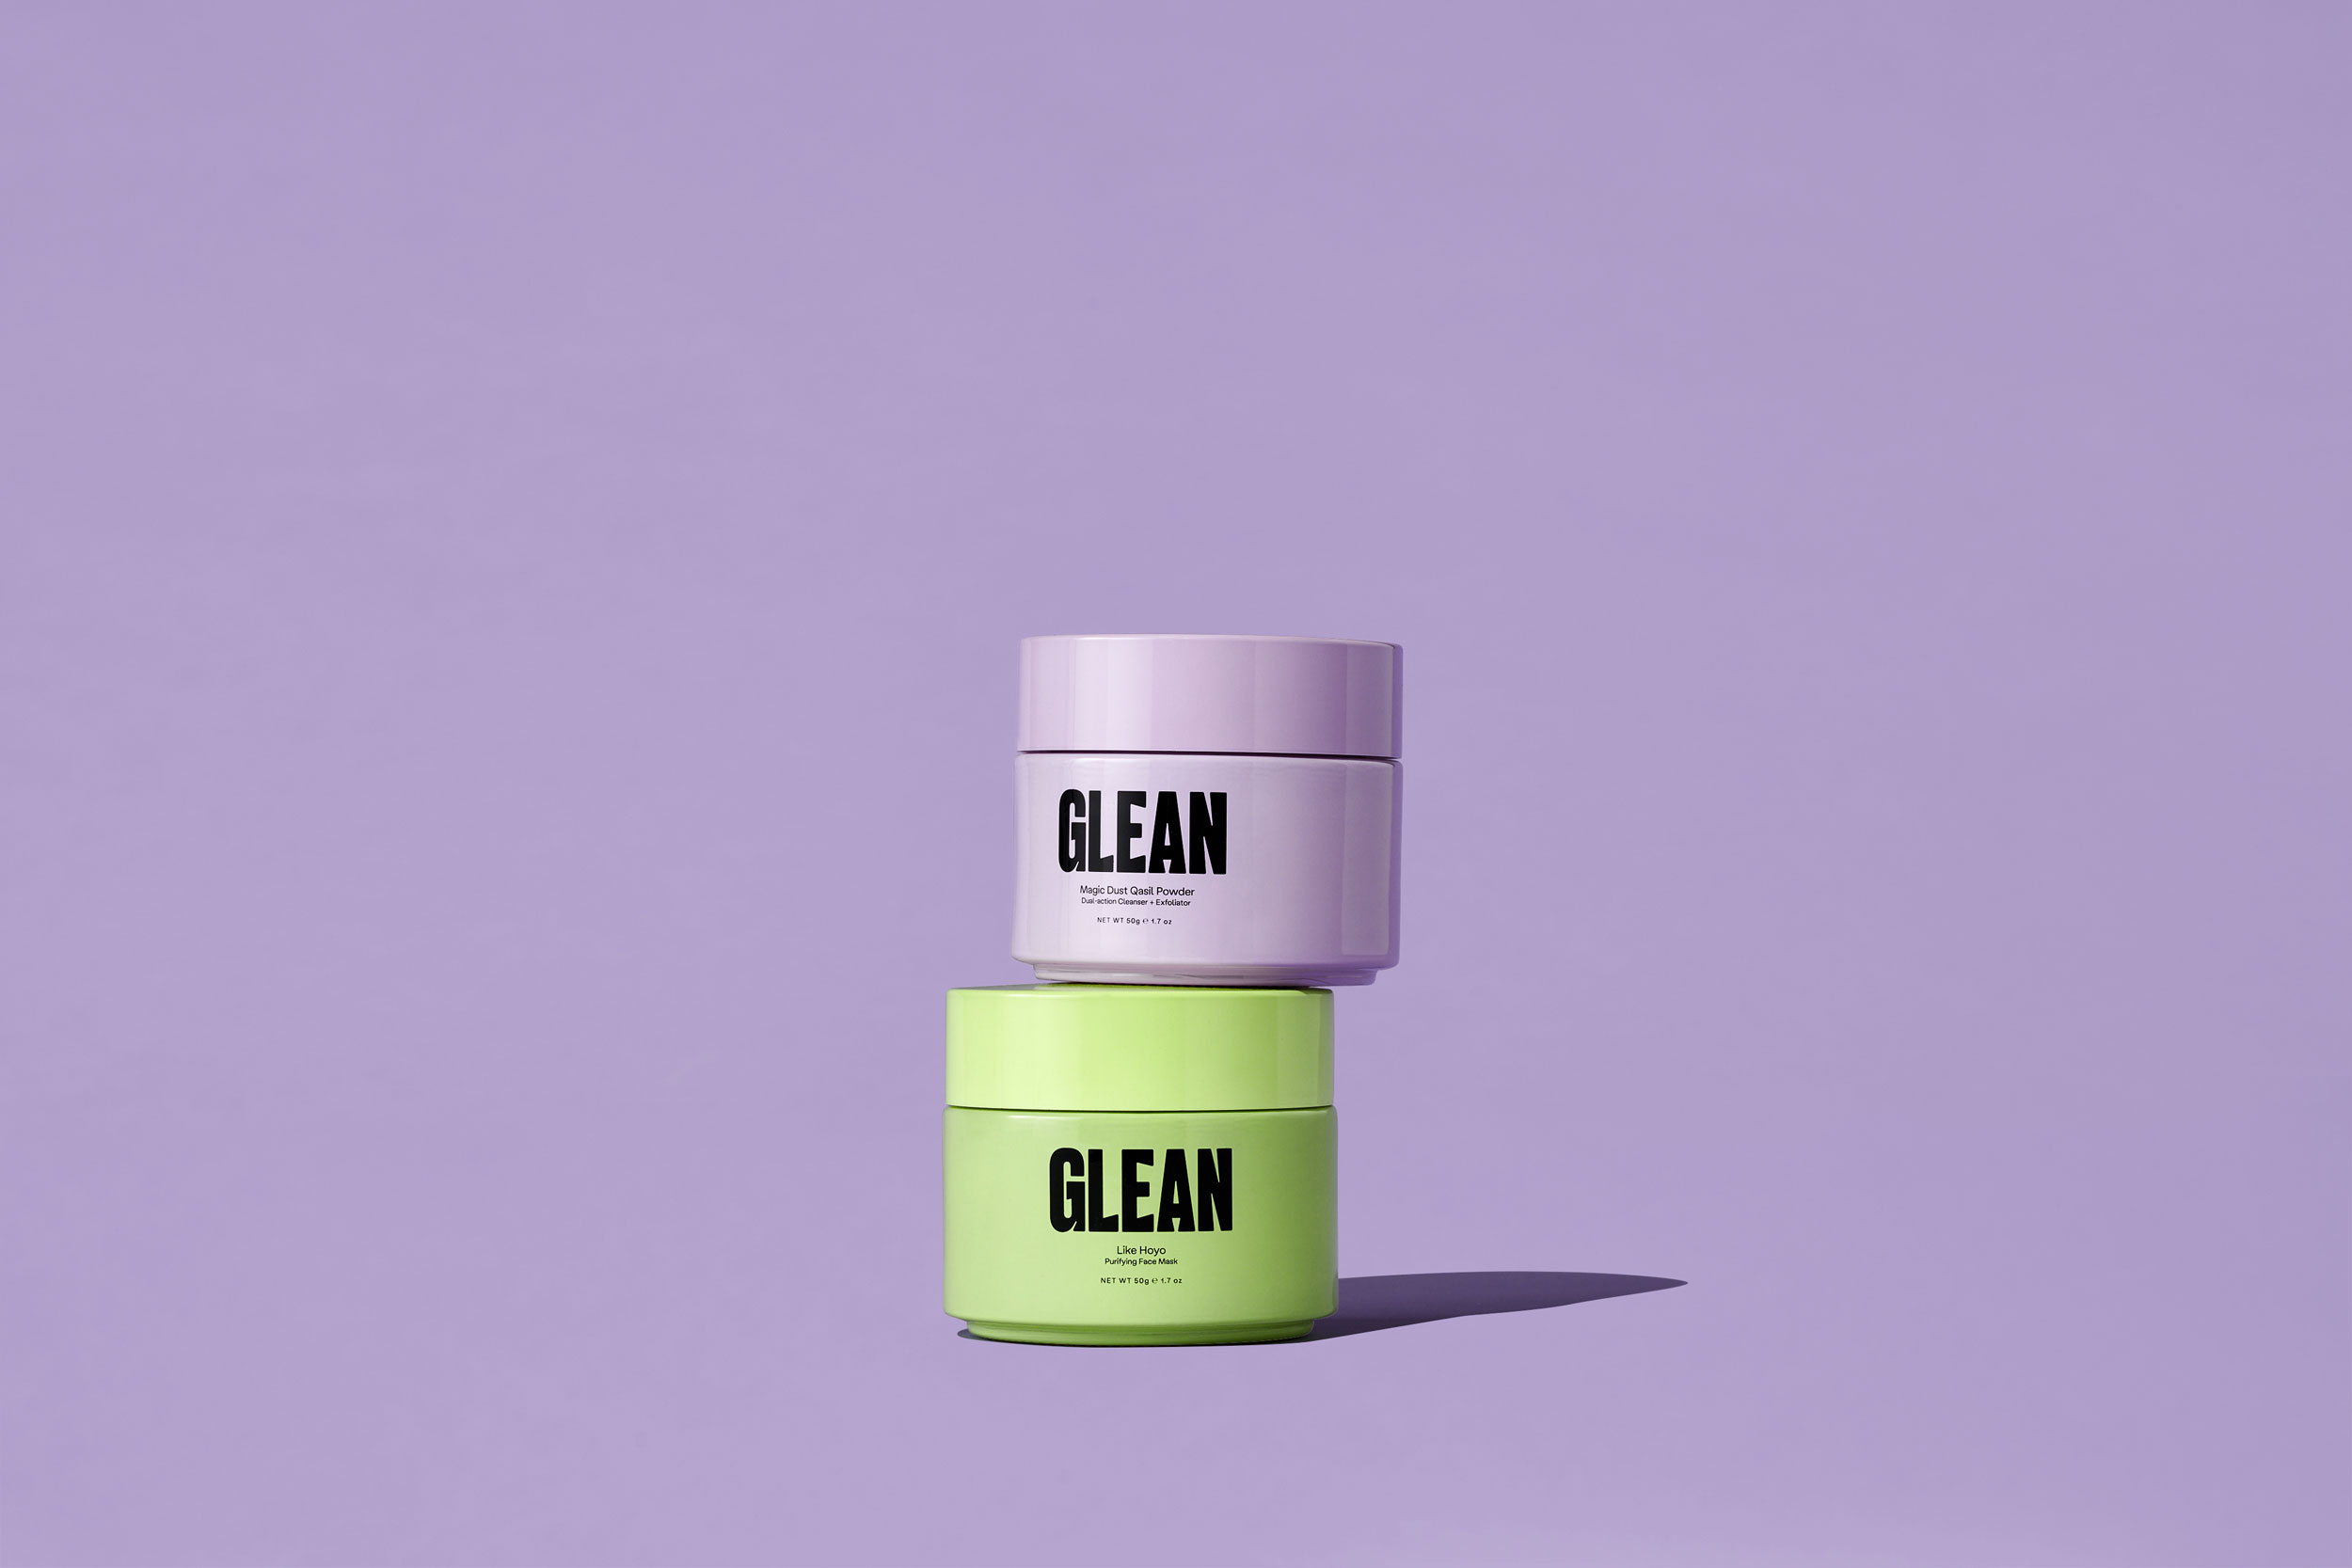 Two stacked facial skincare products